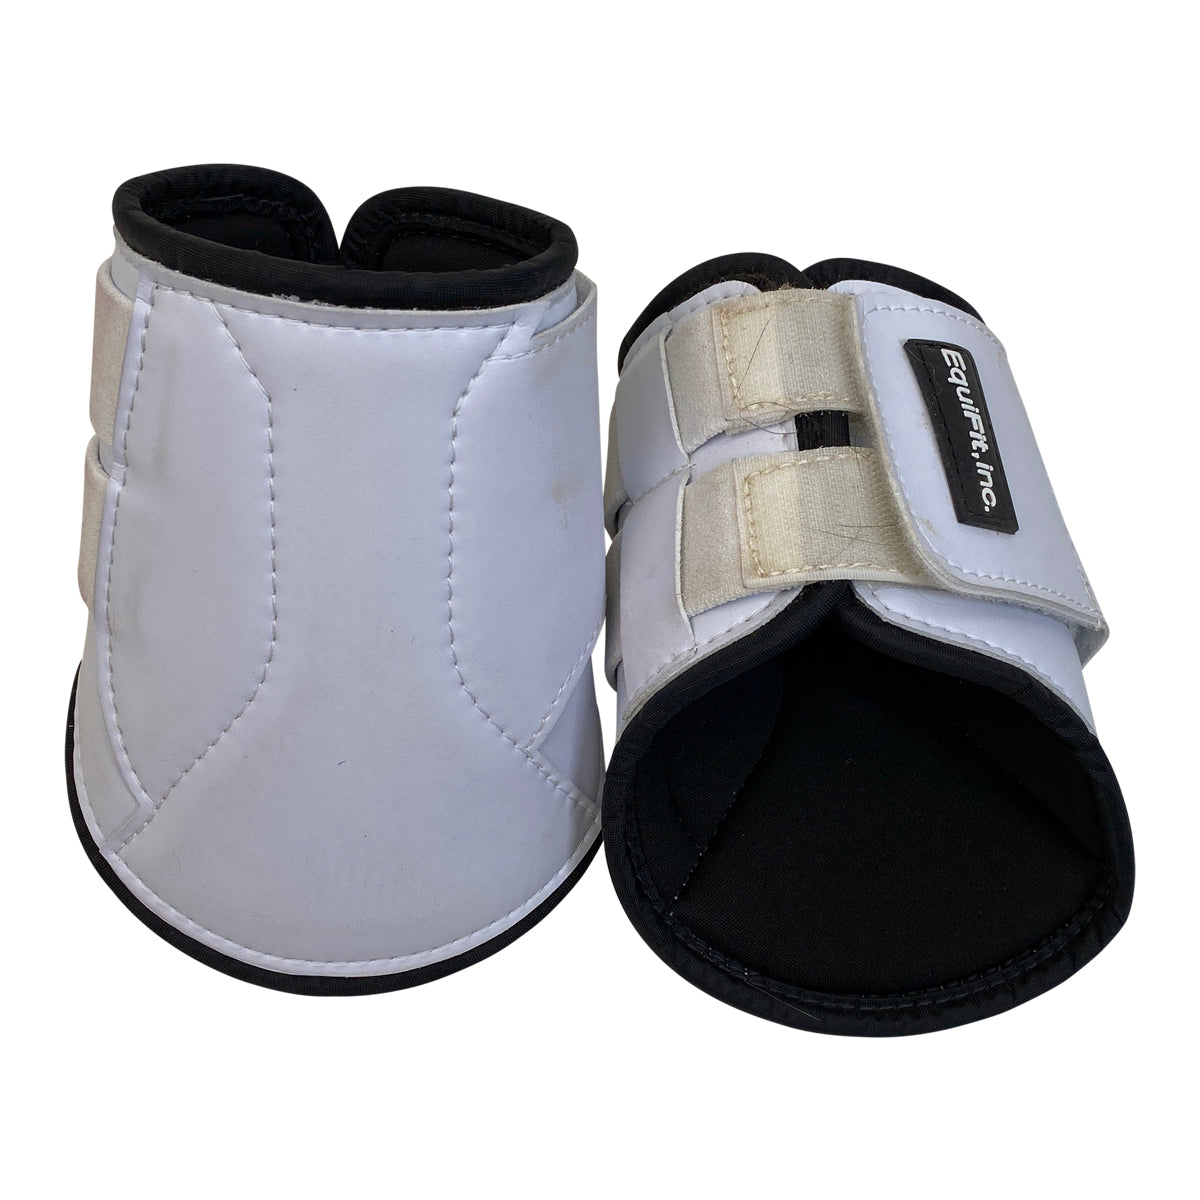 EquiFit 'MultiTeq' Hind Boot in White